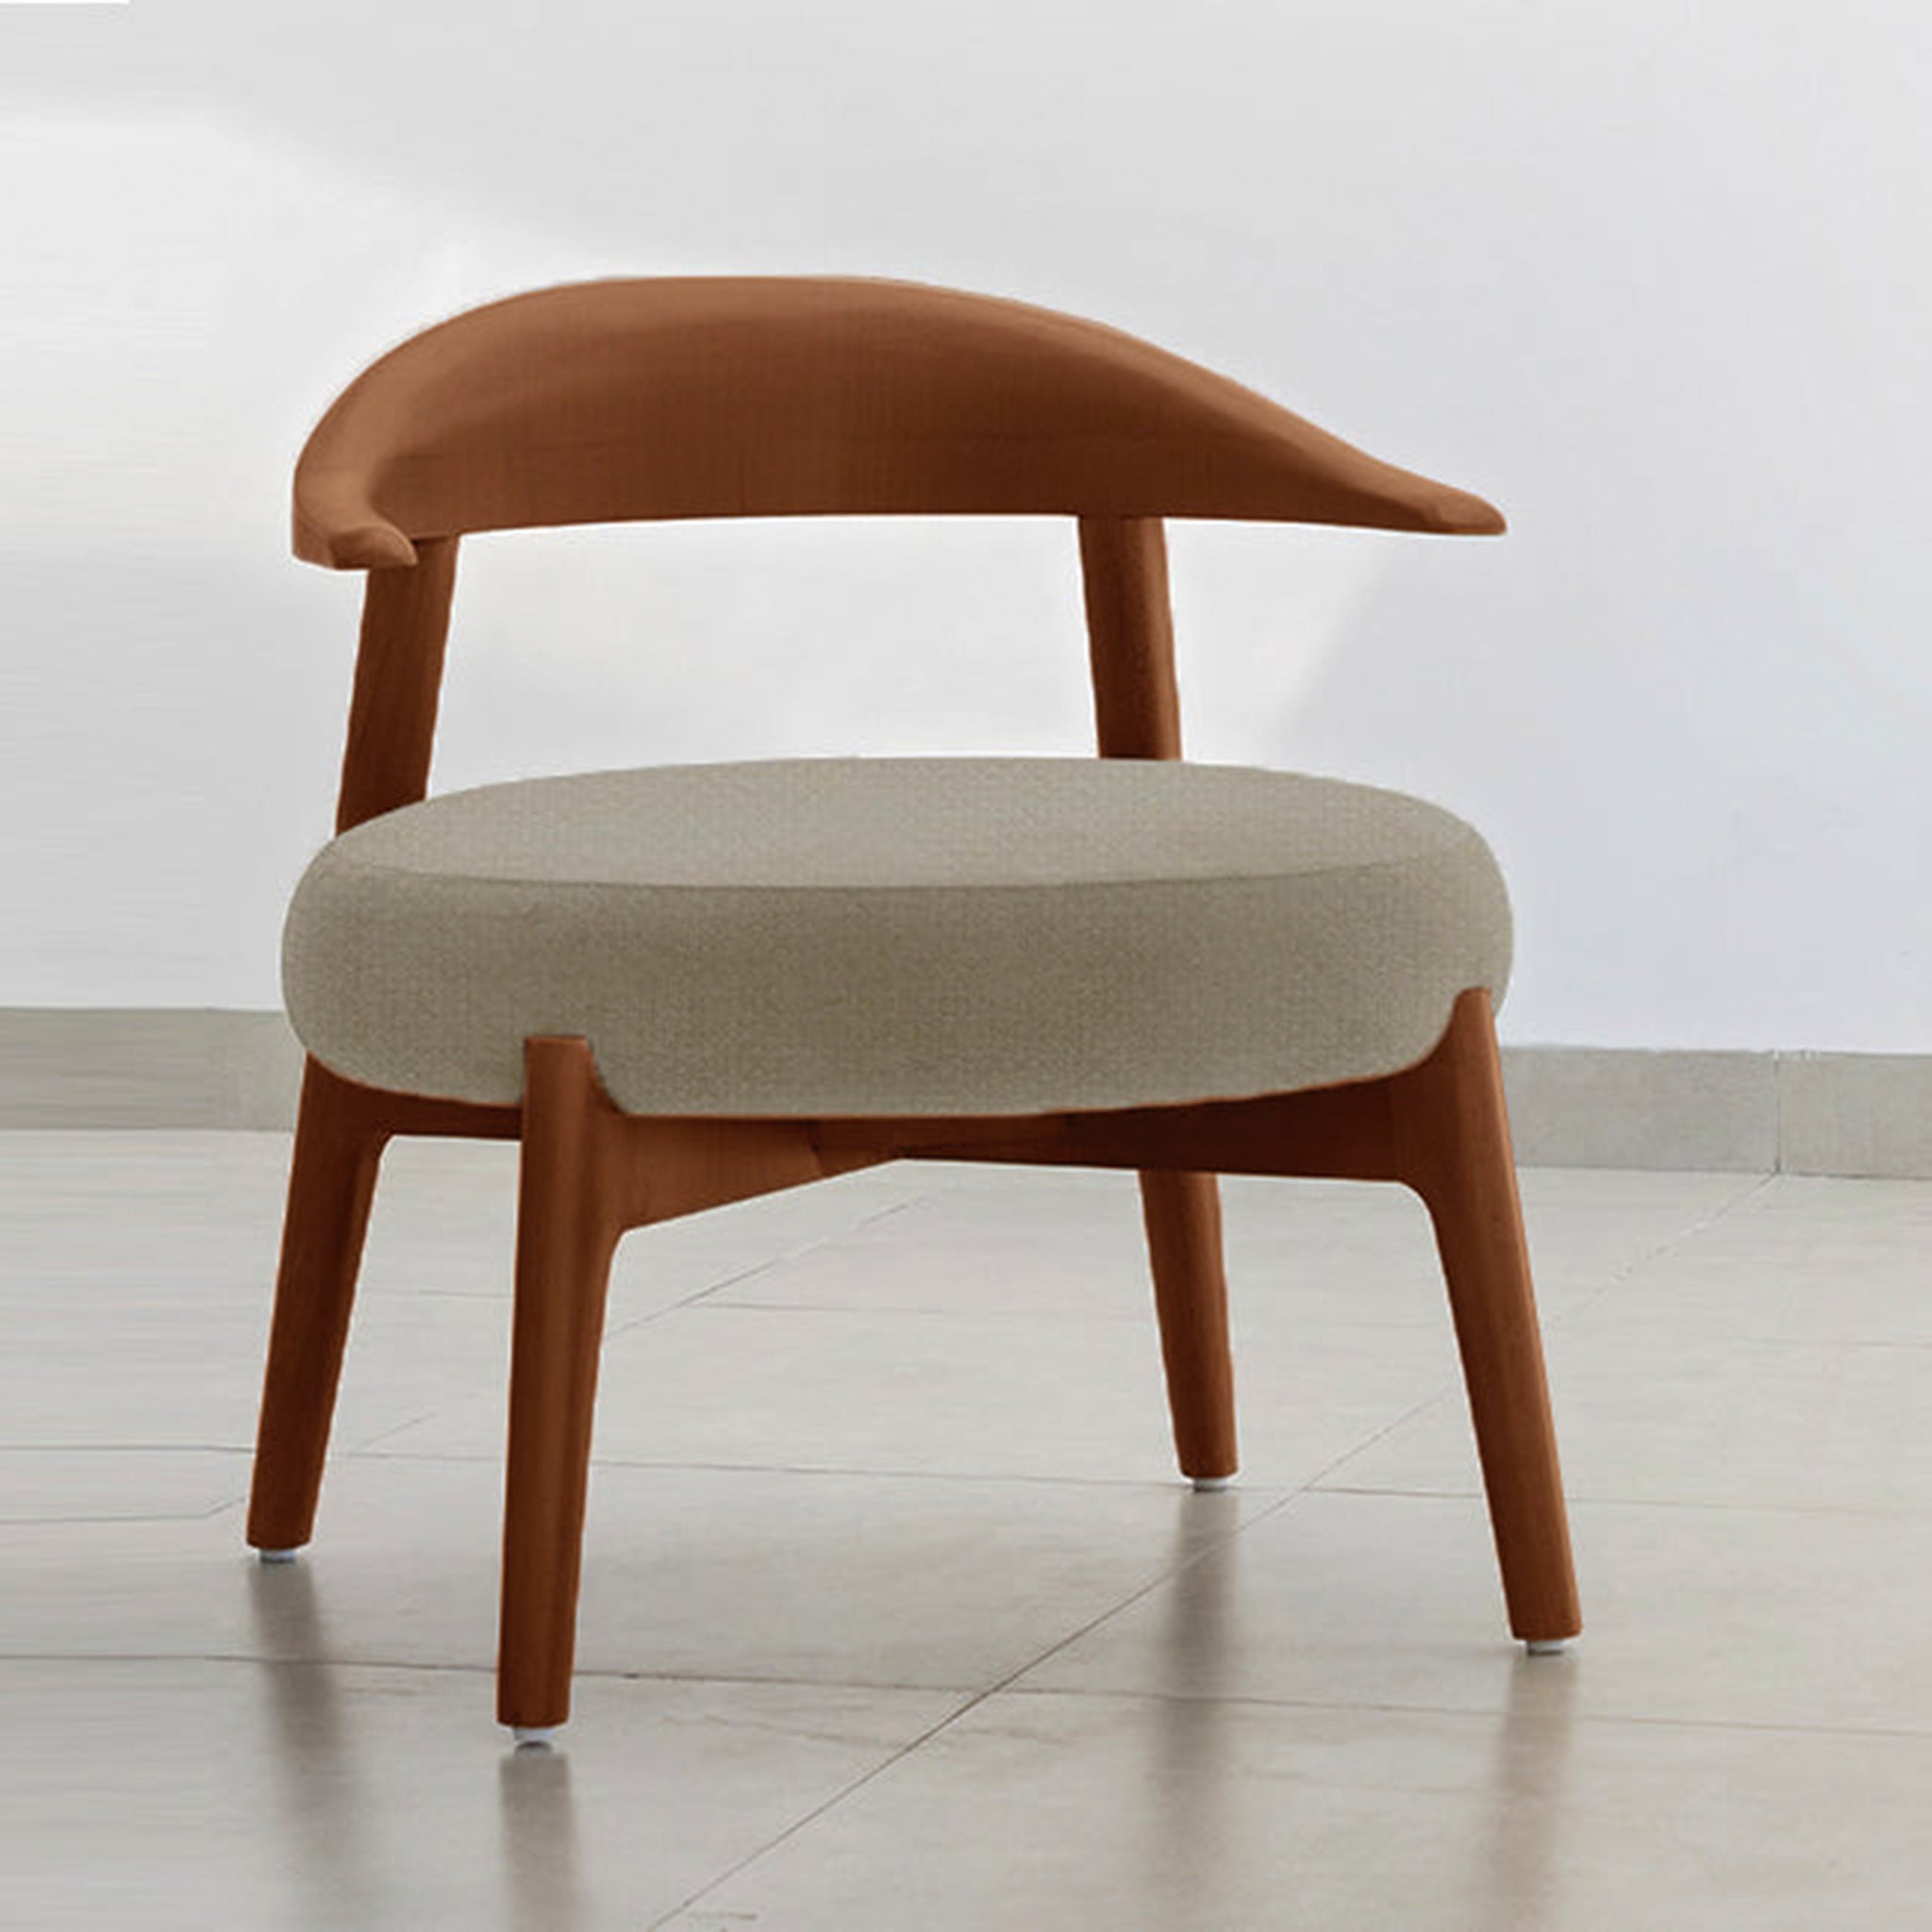 "The Hyde Accent Chair with sleek wooden curves and cozy fabric"